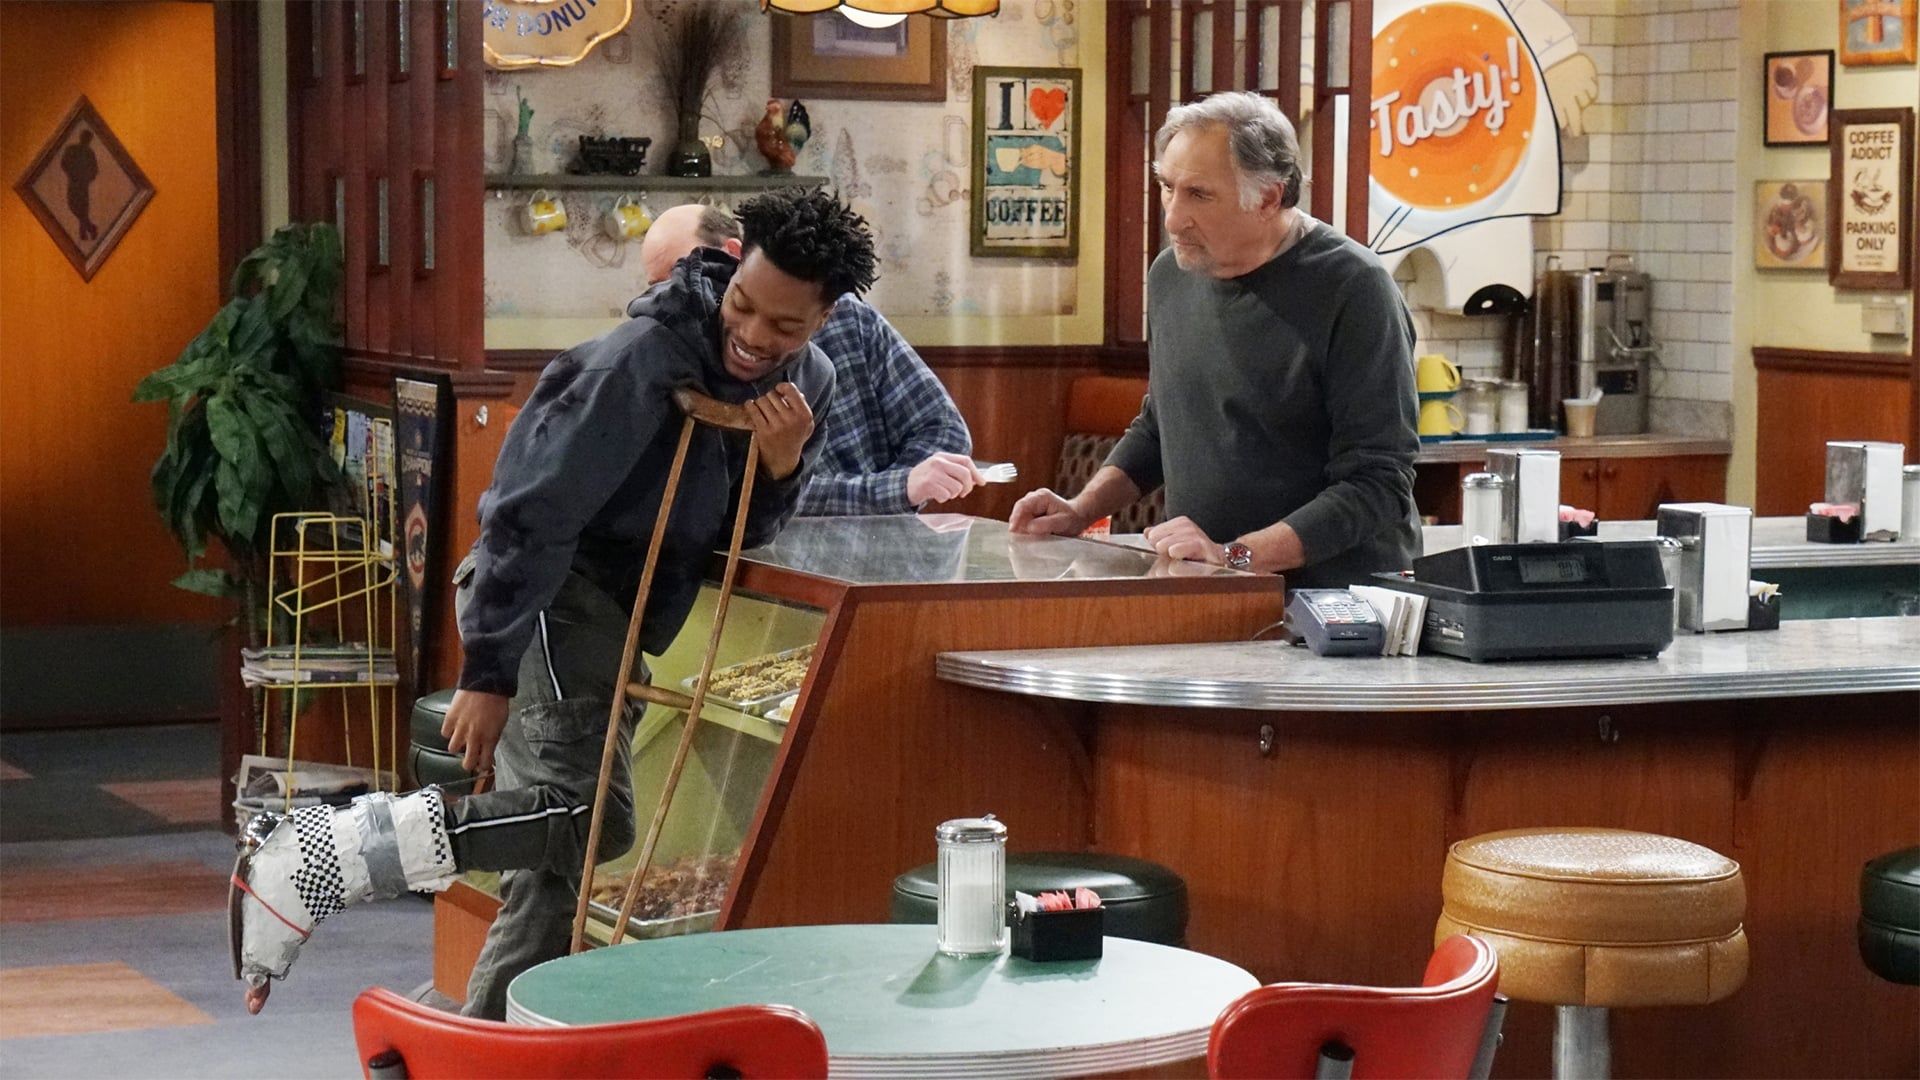 Superior Donuts background